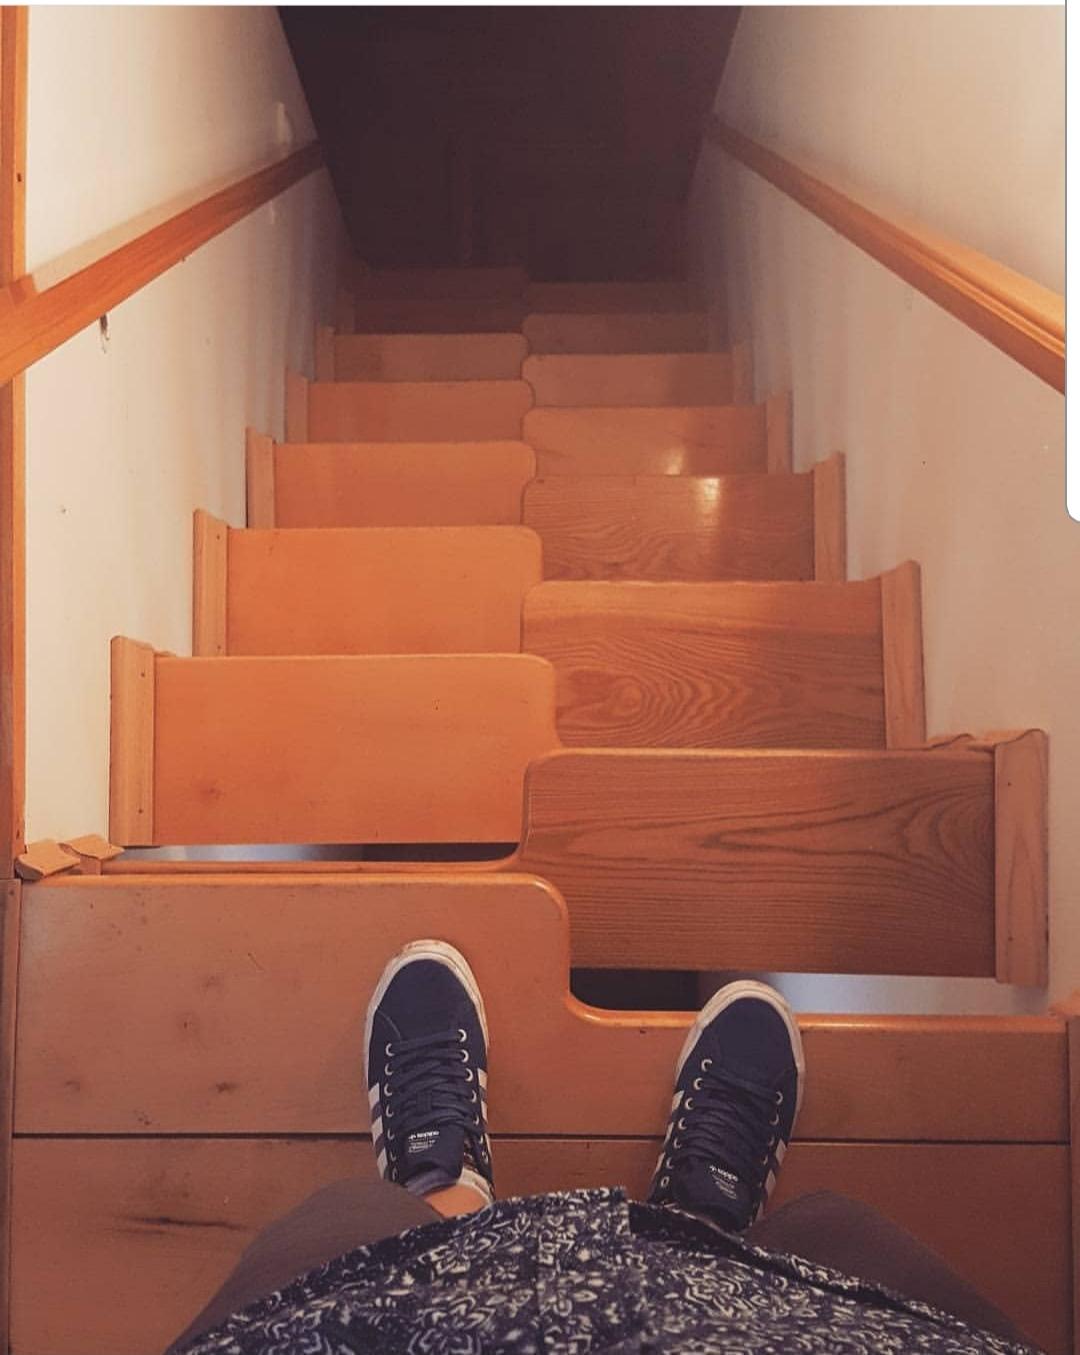 some stairs that go somewhere